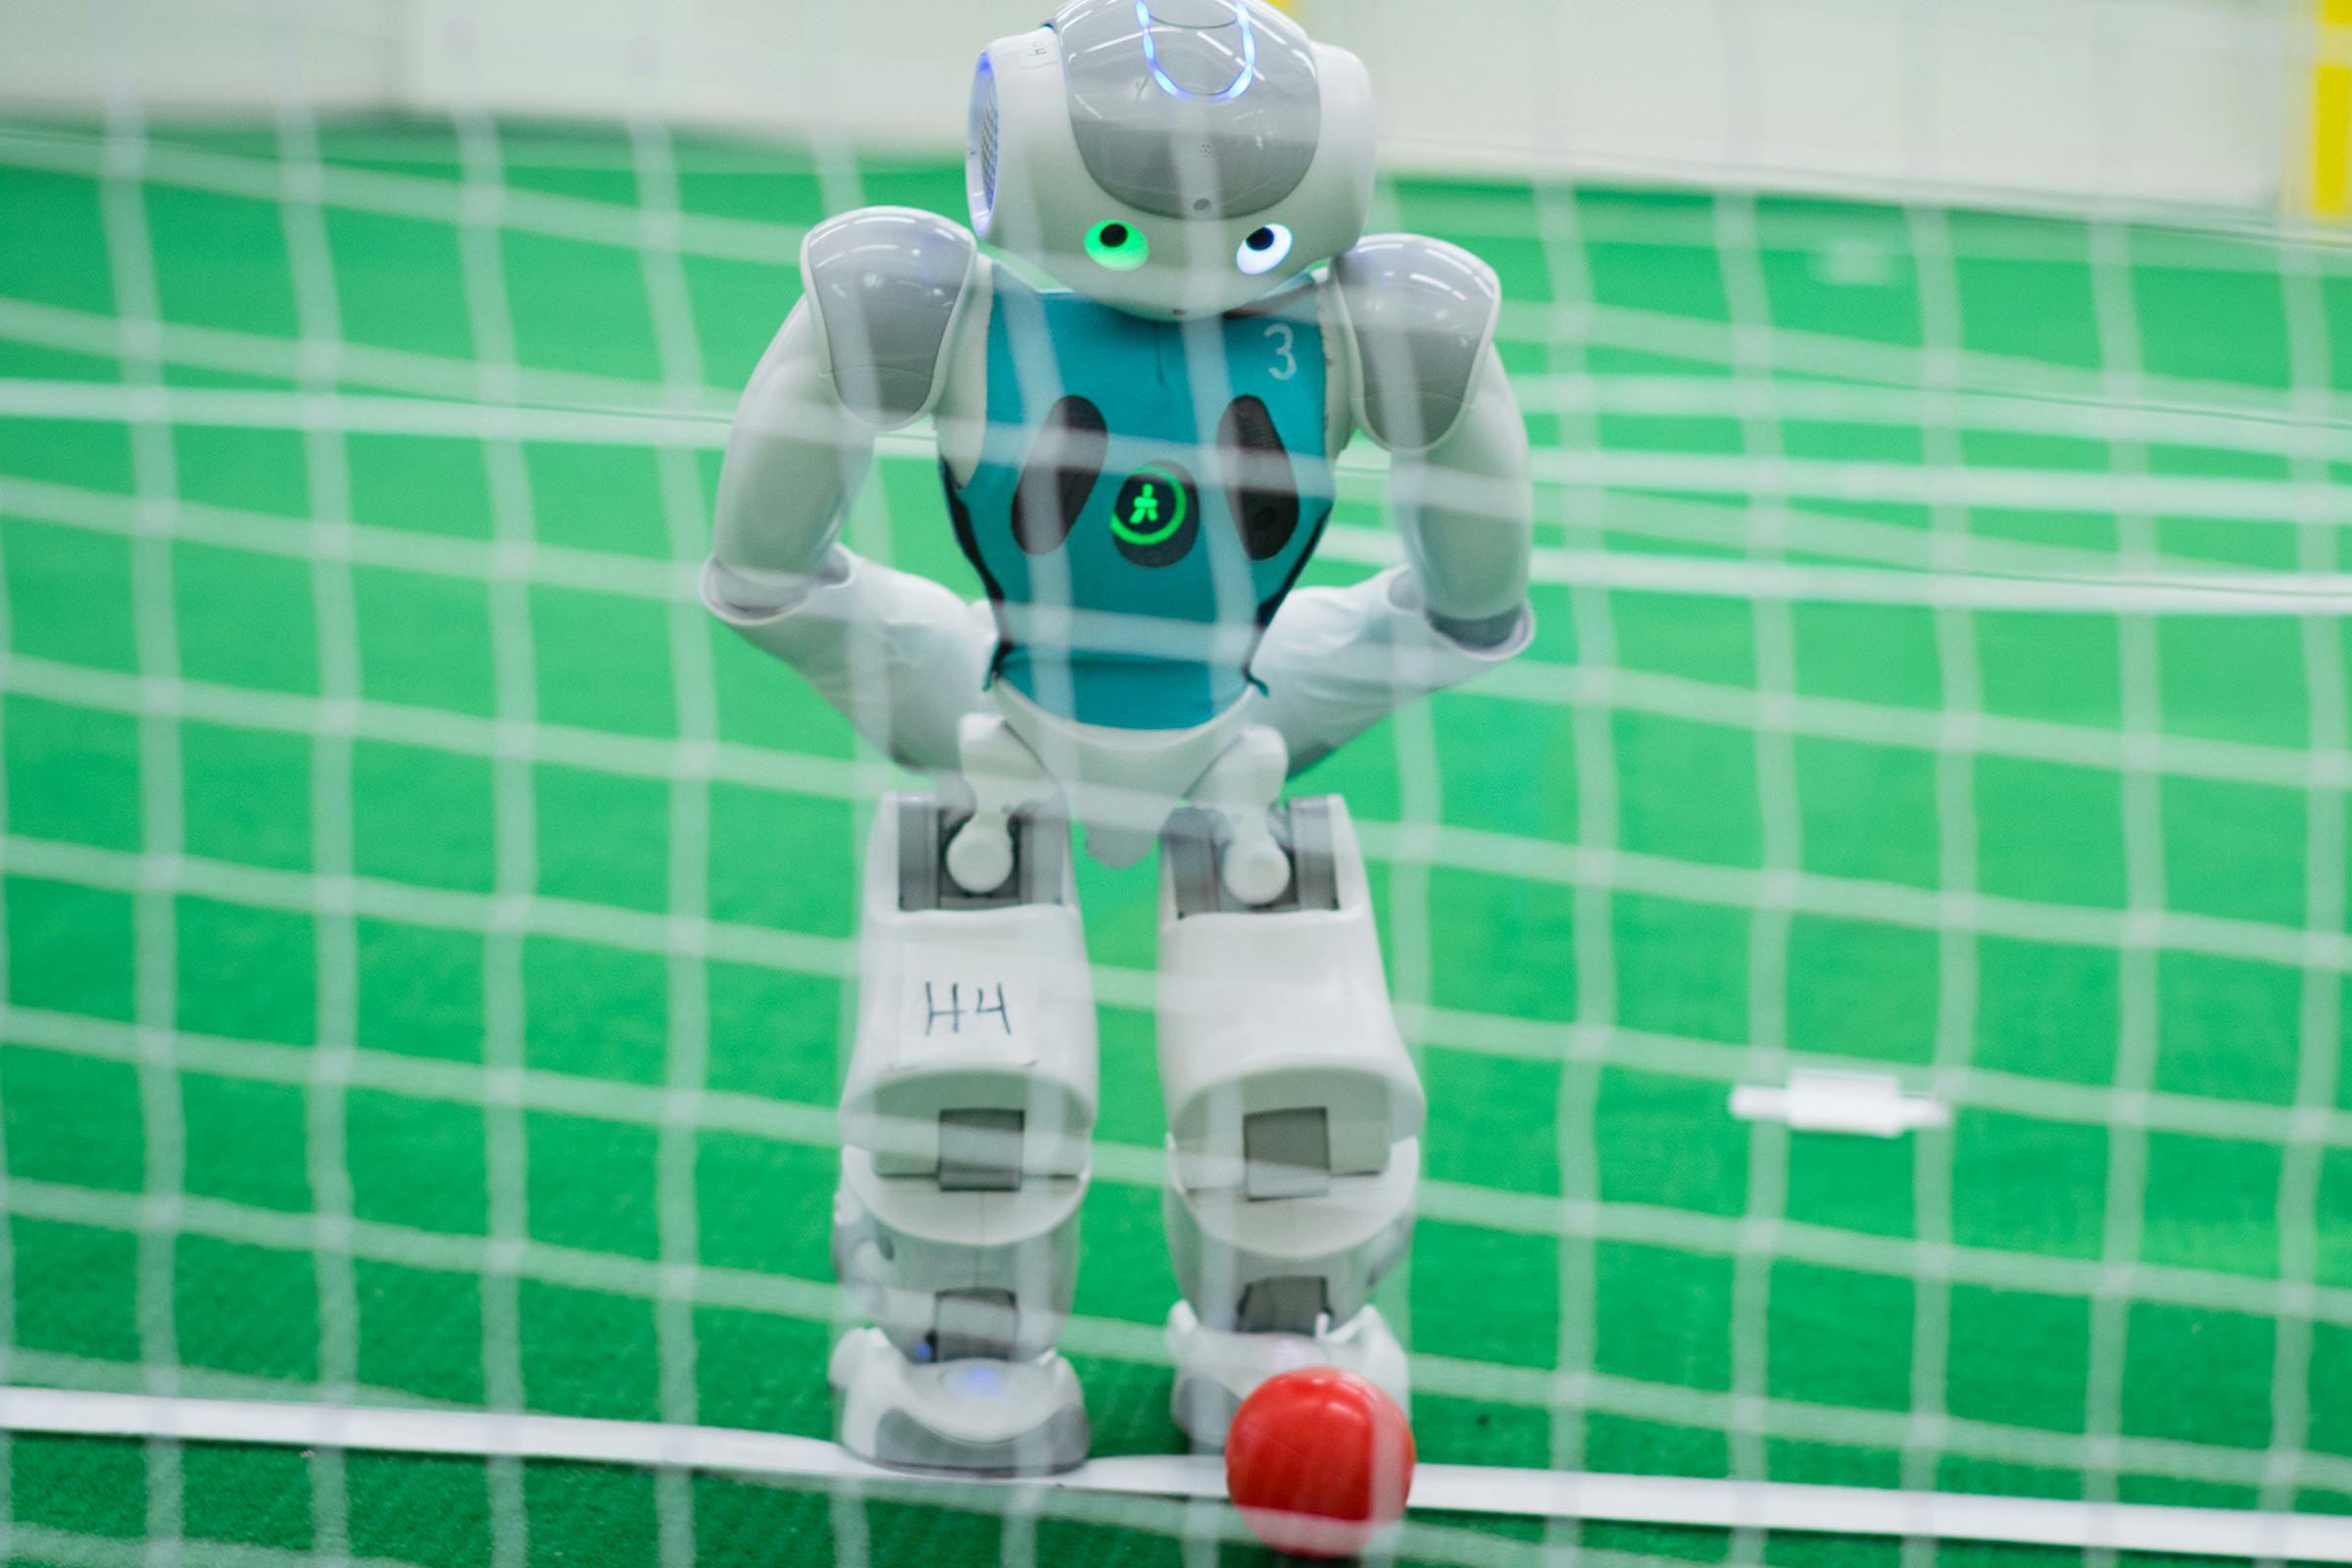 Robot standing on a soccer pitch preparing to kick a red ball into a net